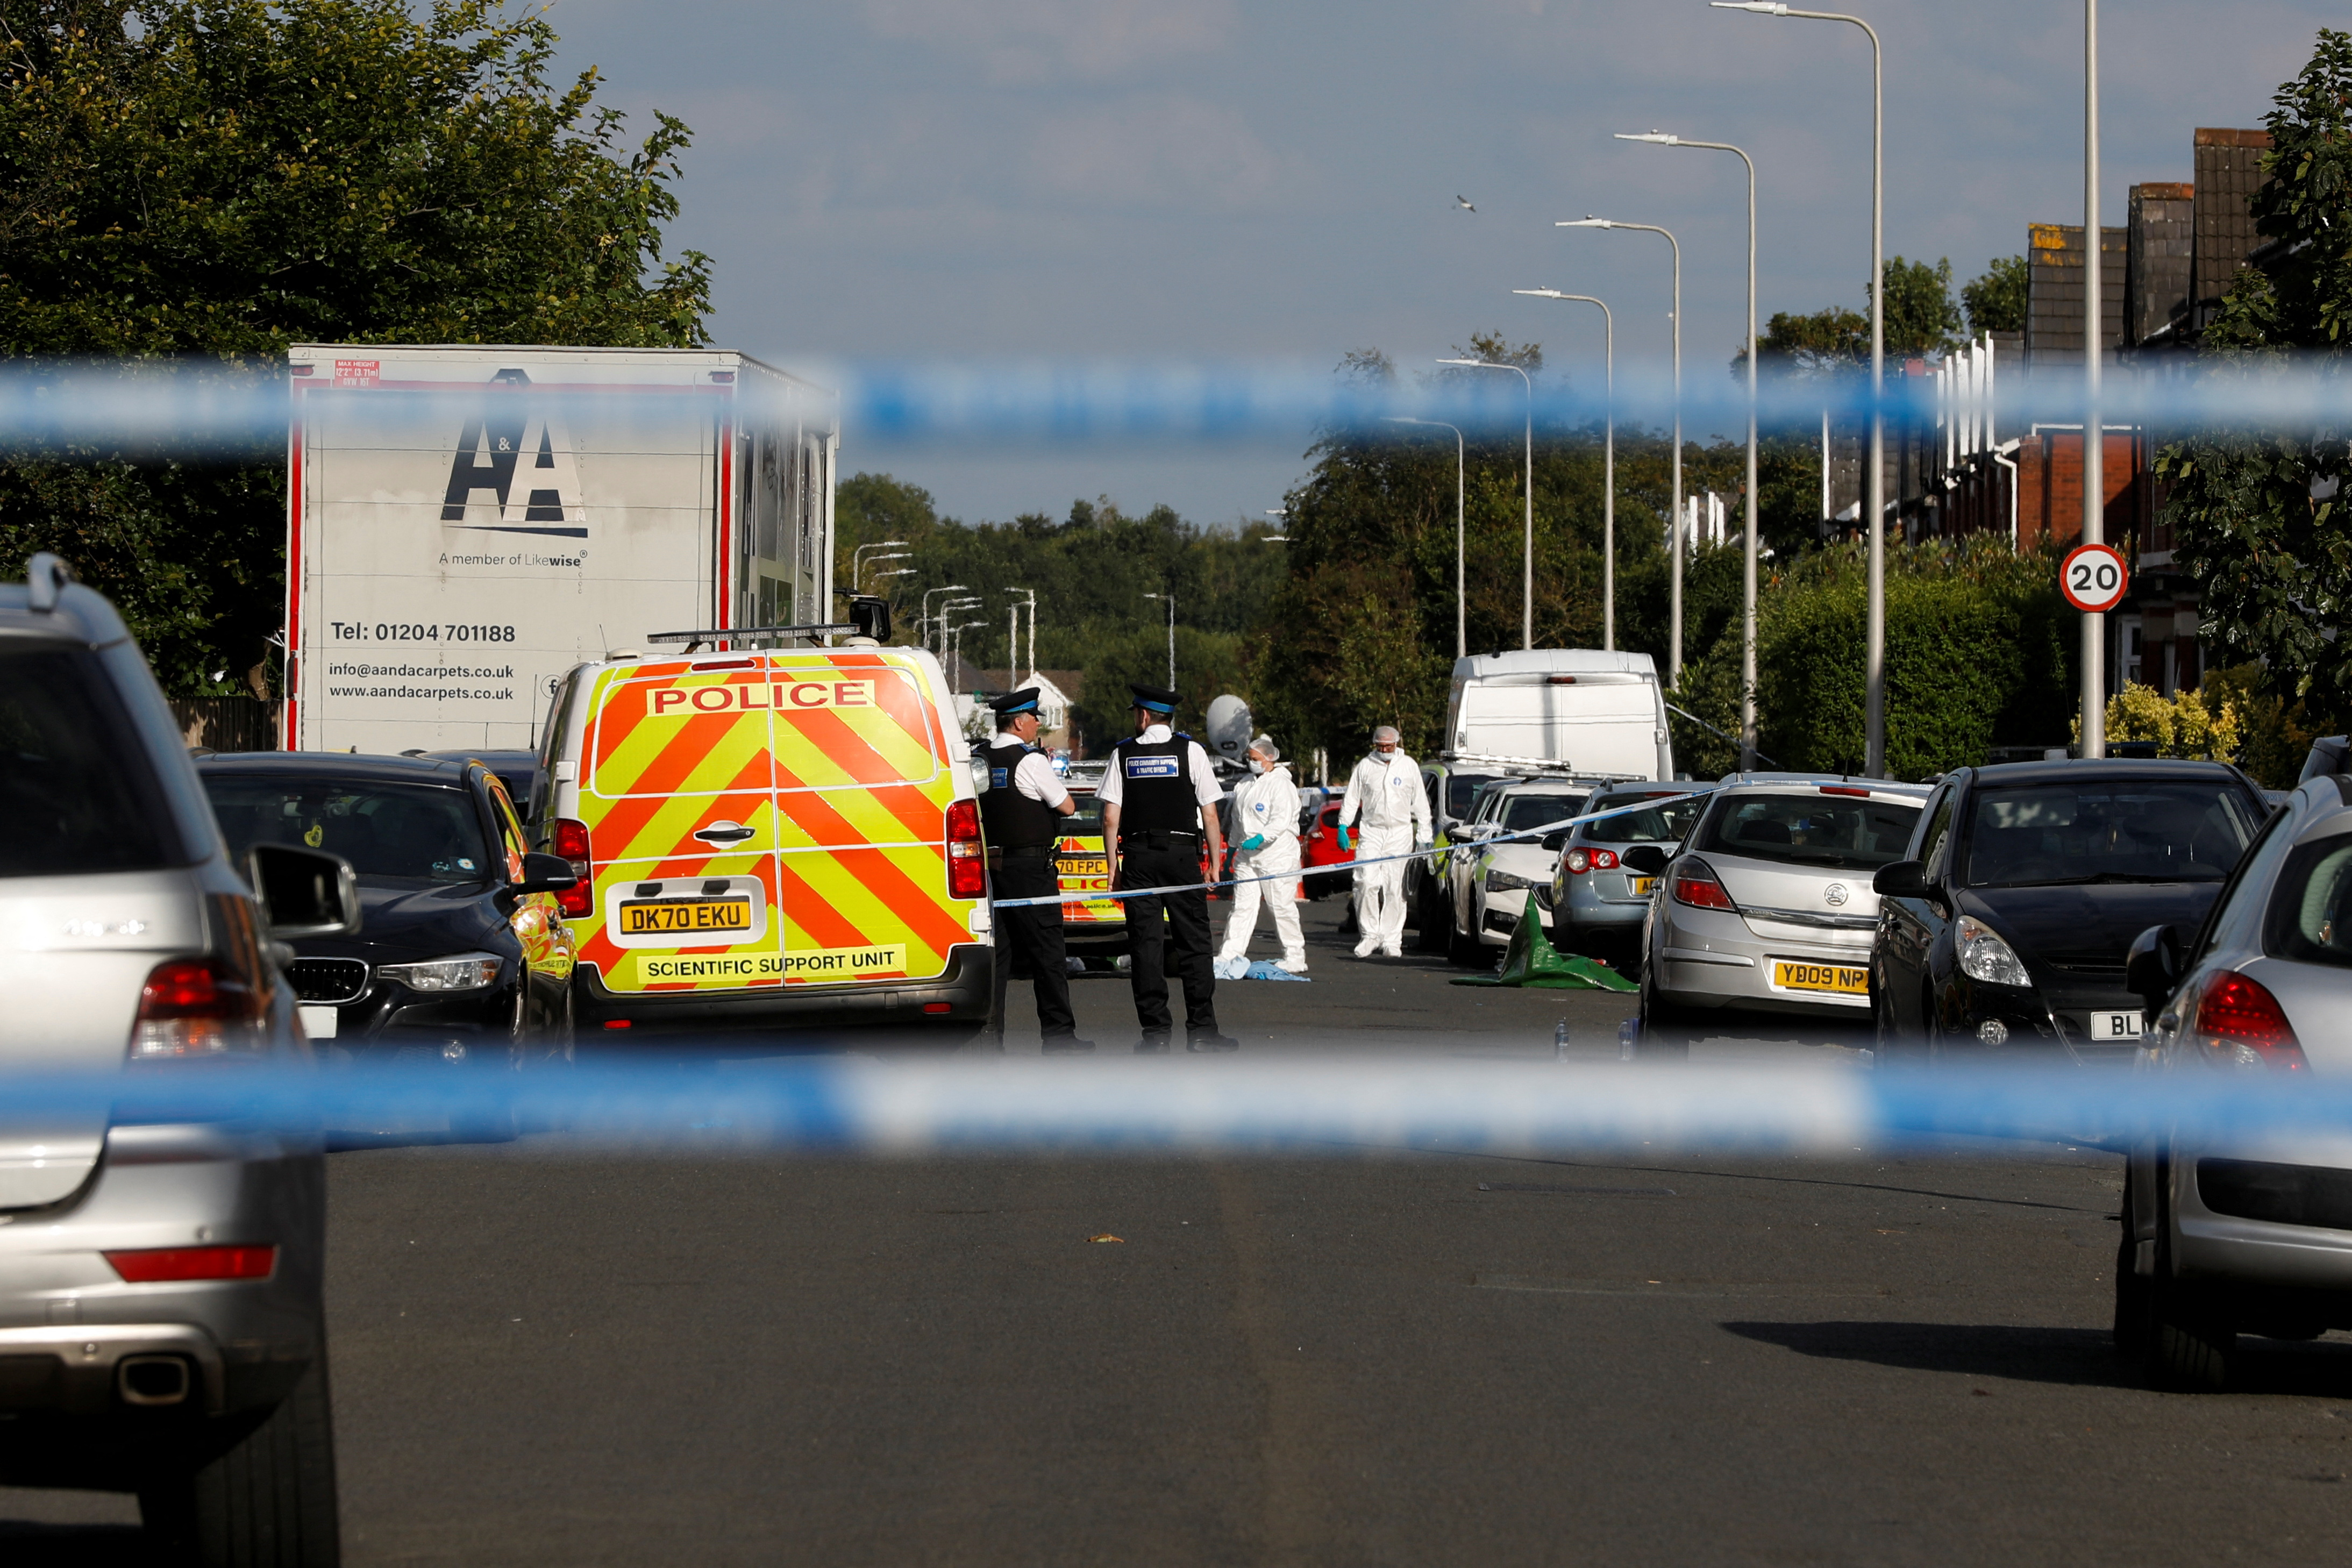 Two children killed in ‘ferocious’ knife attack, UK police say